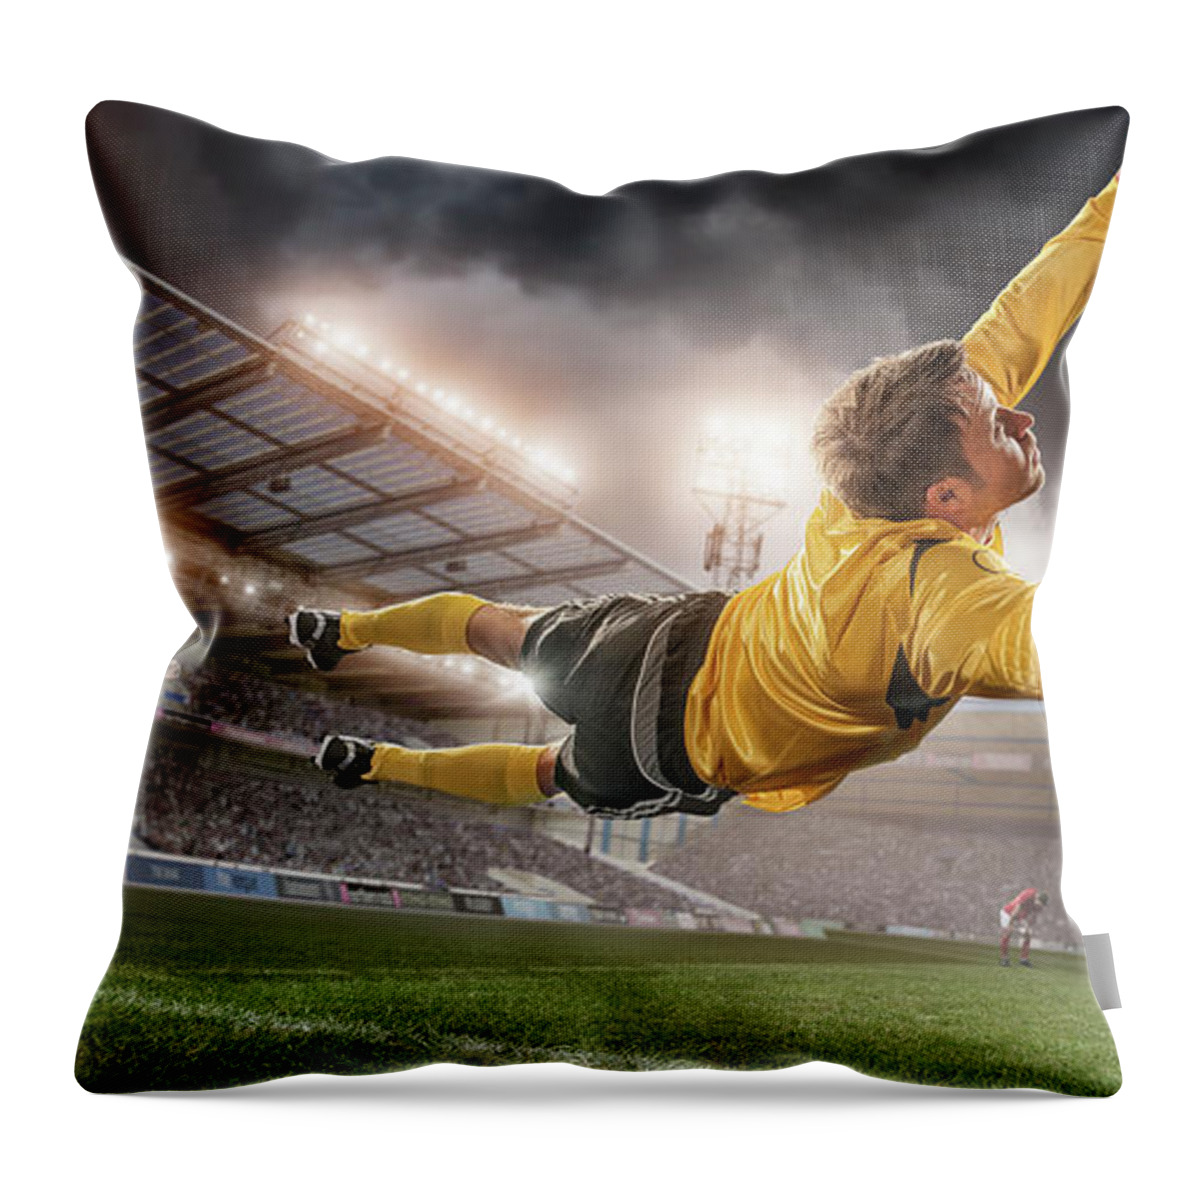 Soccer Uniform Throw Pillow featuring the photograph Soccer Goalie In Mid Air Save by Peepo